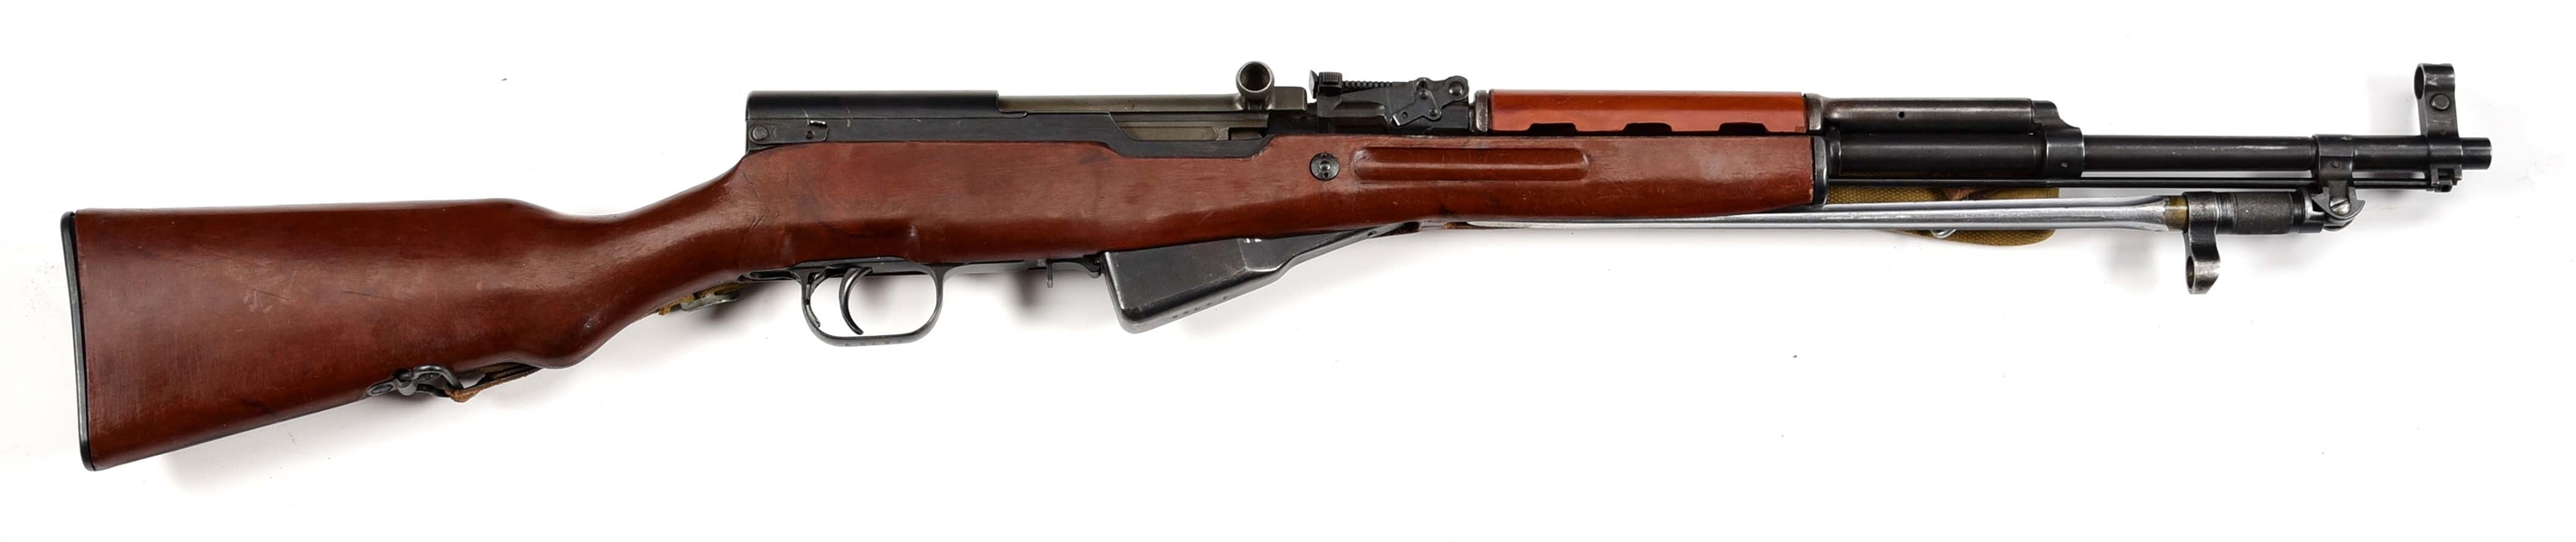 (C) NORINCO TYPE 56 SKS BOLT ACTION RIFLE WITH JUNGLE STOCK